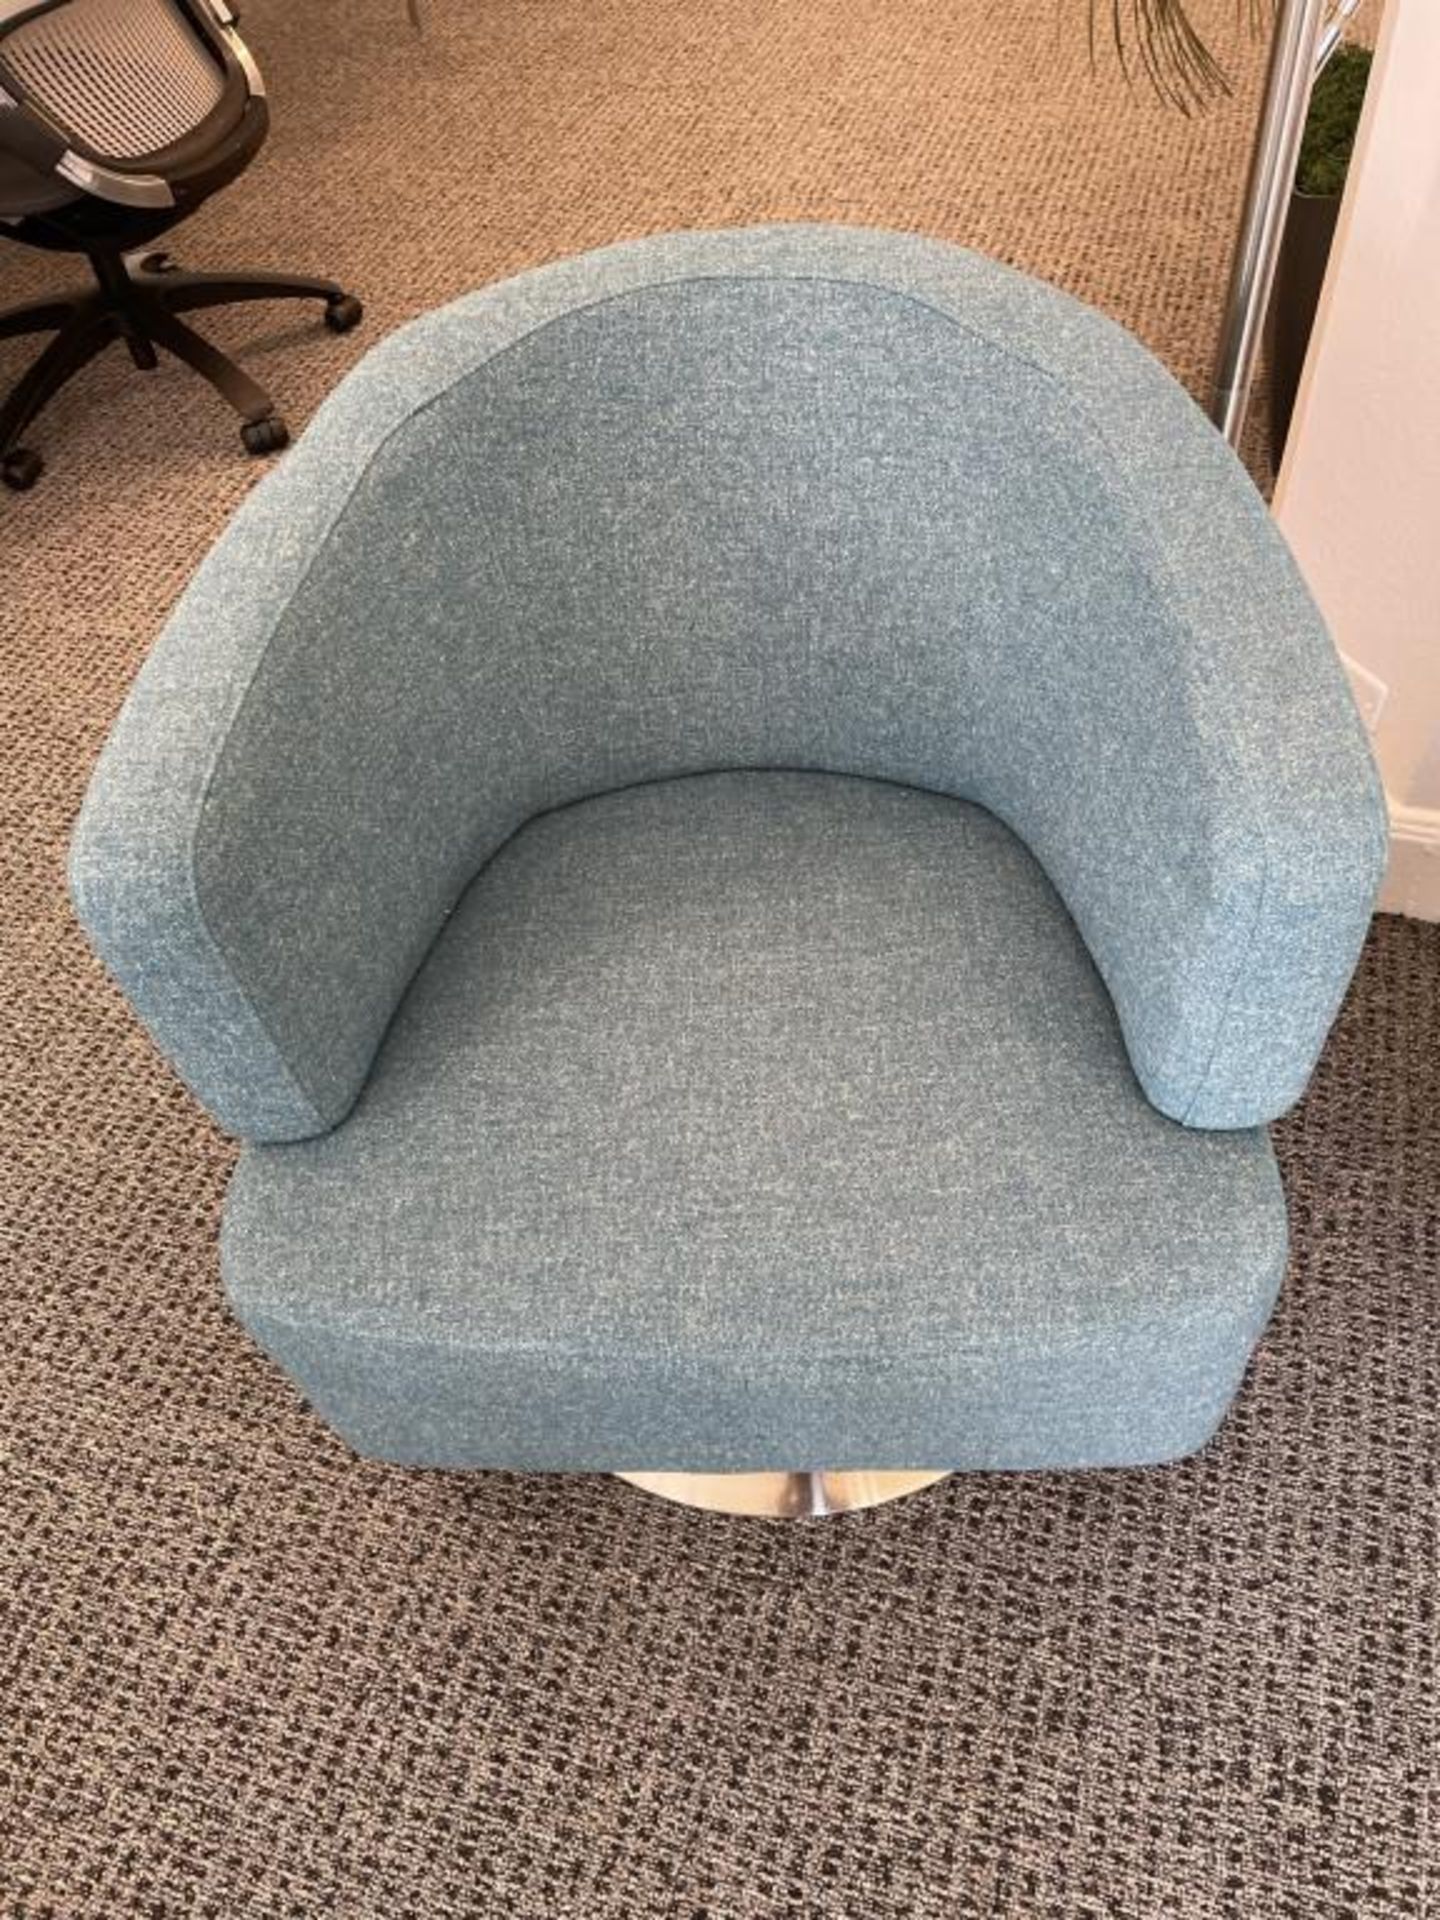 (2qty) Jason Furniture Teal Swivel Chairs - Image 5 of 6